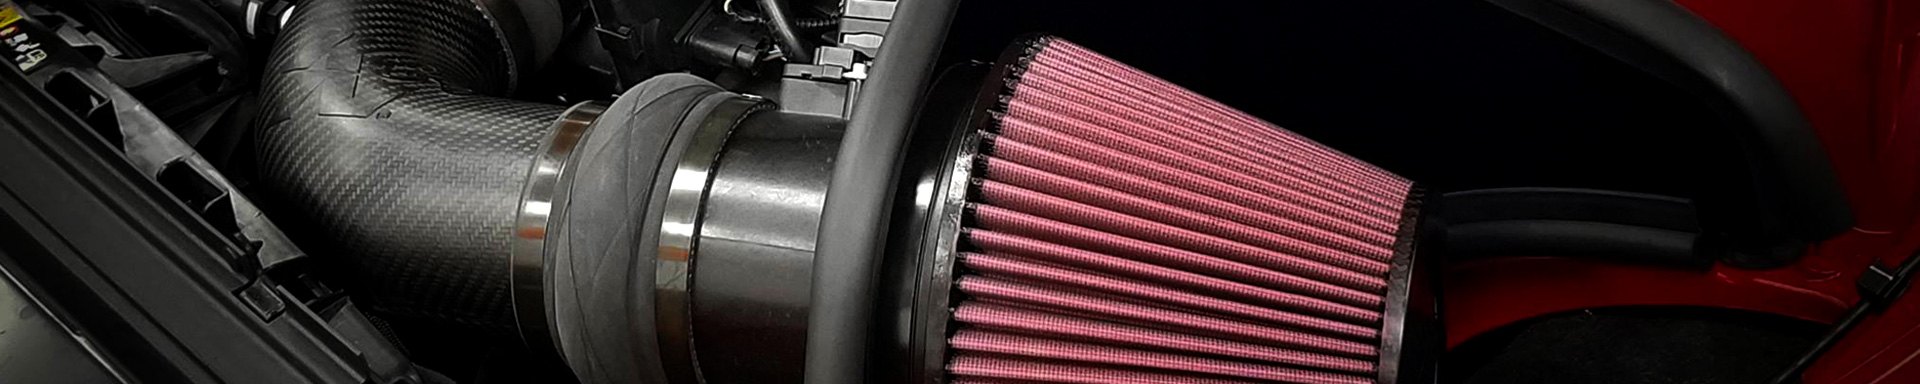 Performance Air Intake Systems: More Air Equals More Power